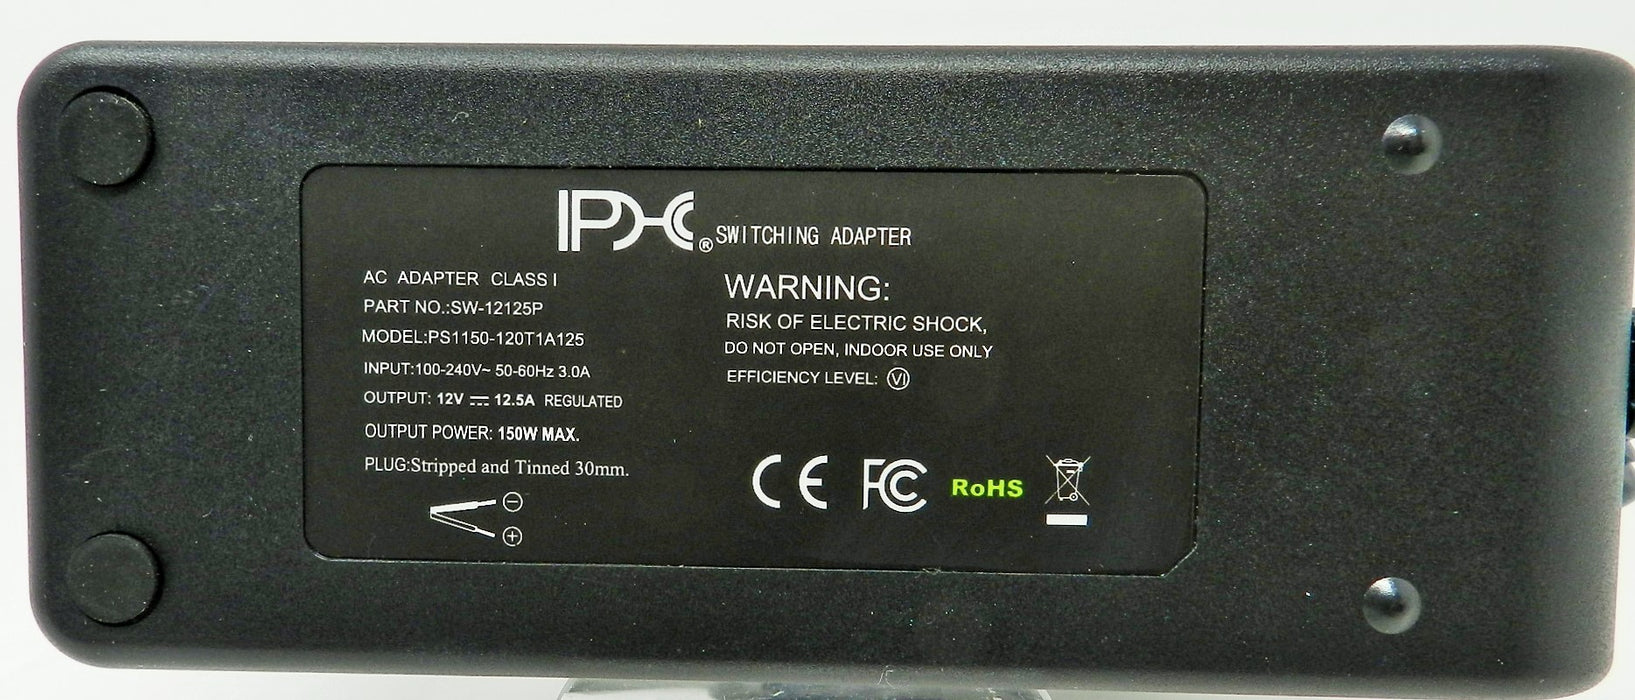 AC-DC Switching Regulated Power Supply 12VDC @ 12500mA; Tinned end wires no DC plug; Part # SW-12125P - AC-DC PowerShack